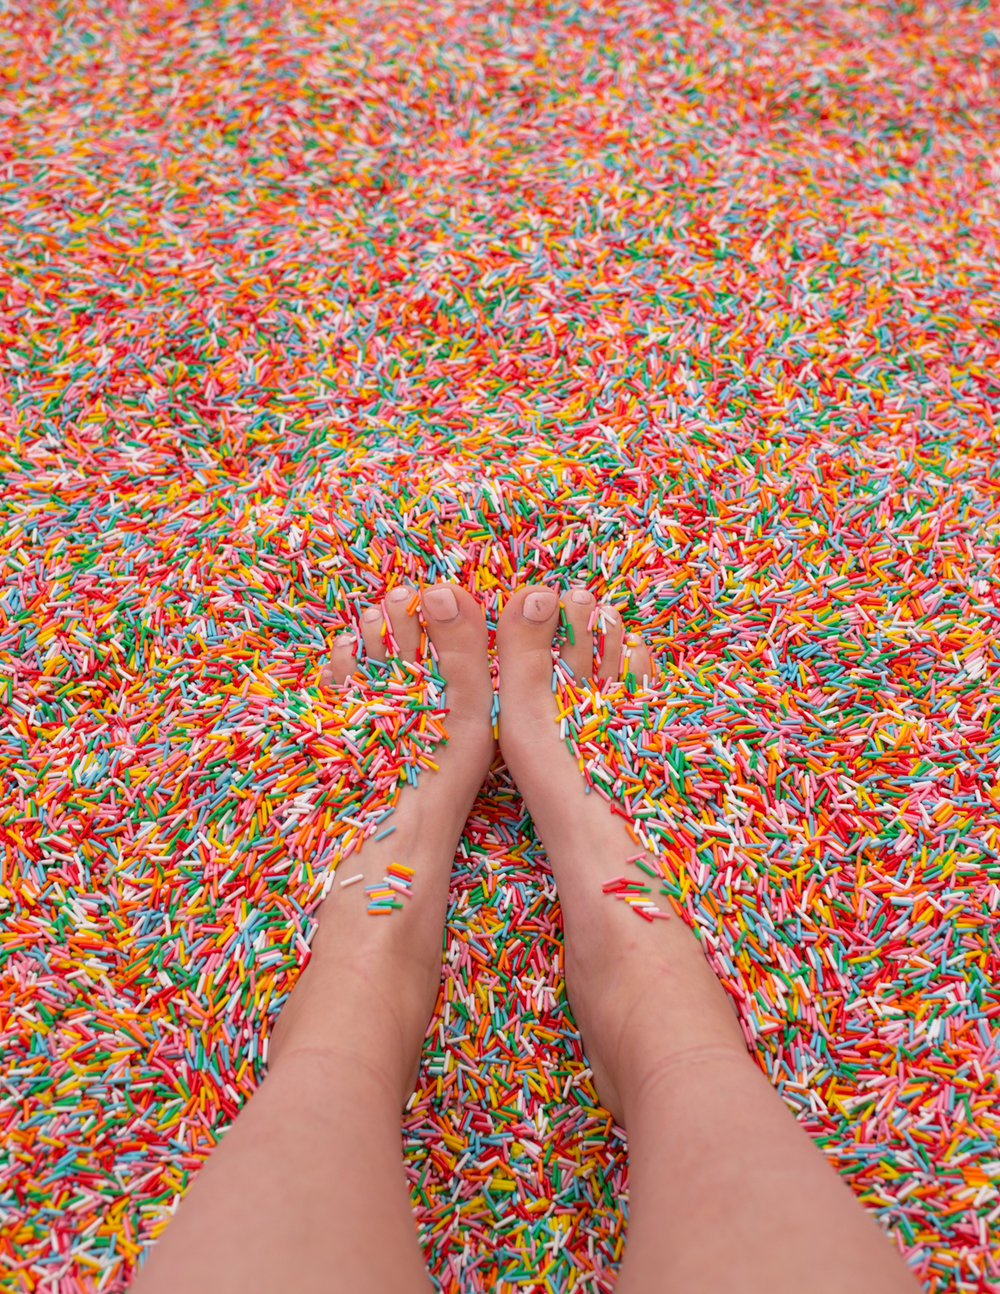  Stick your toes in the sand, er, sprinkles!  